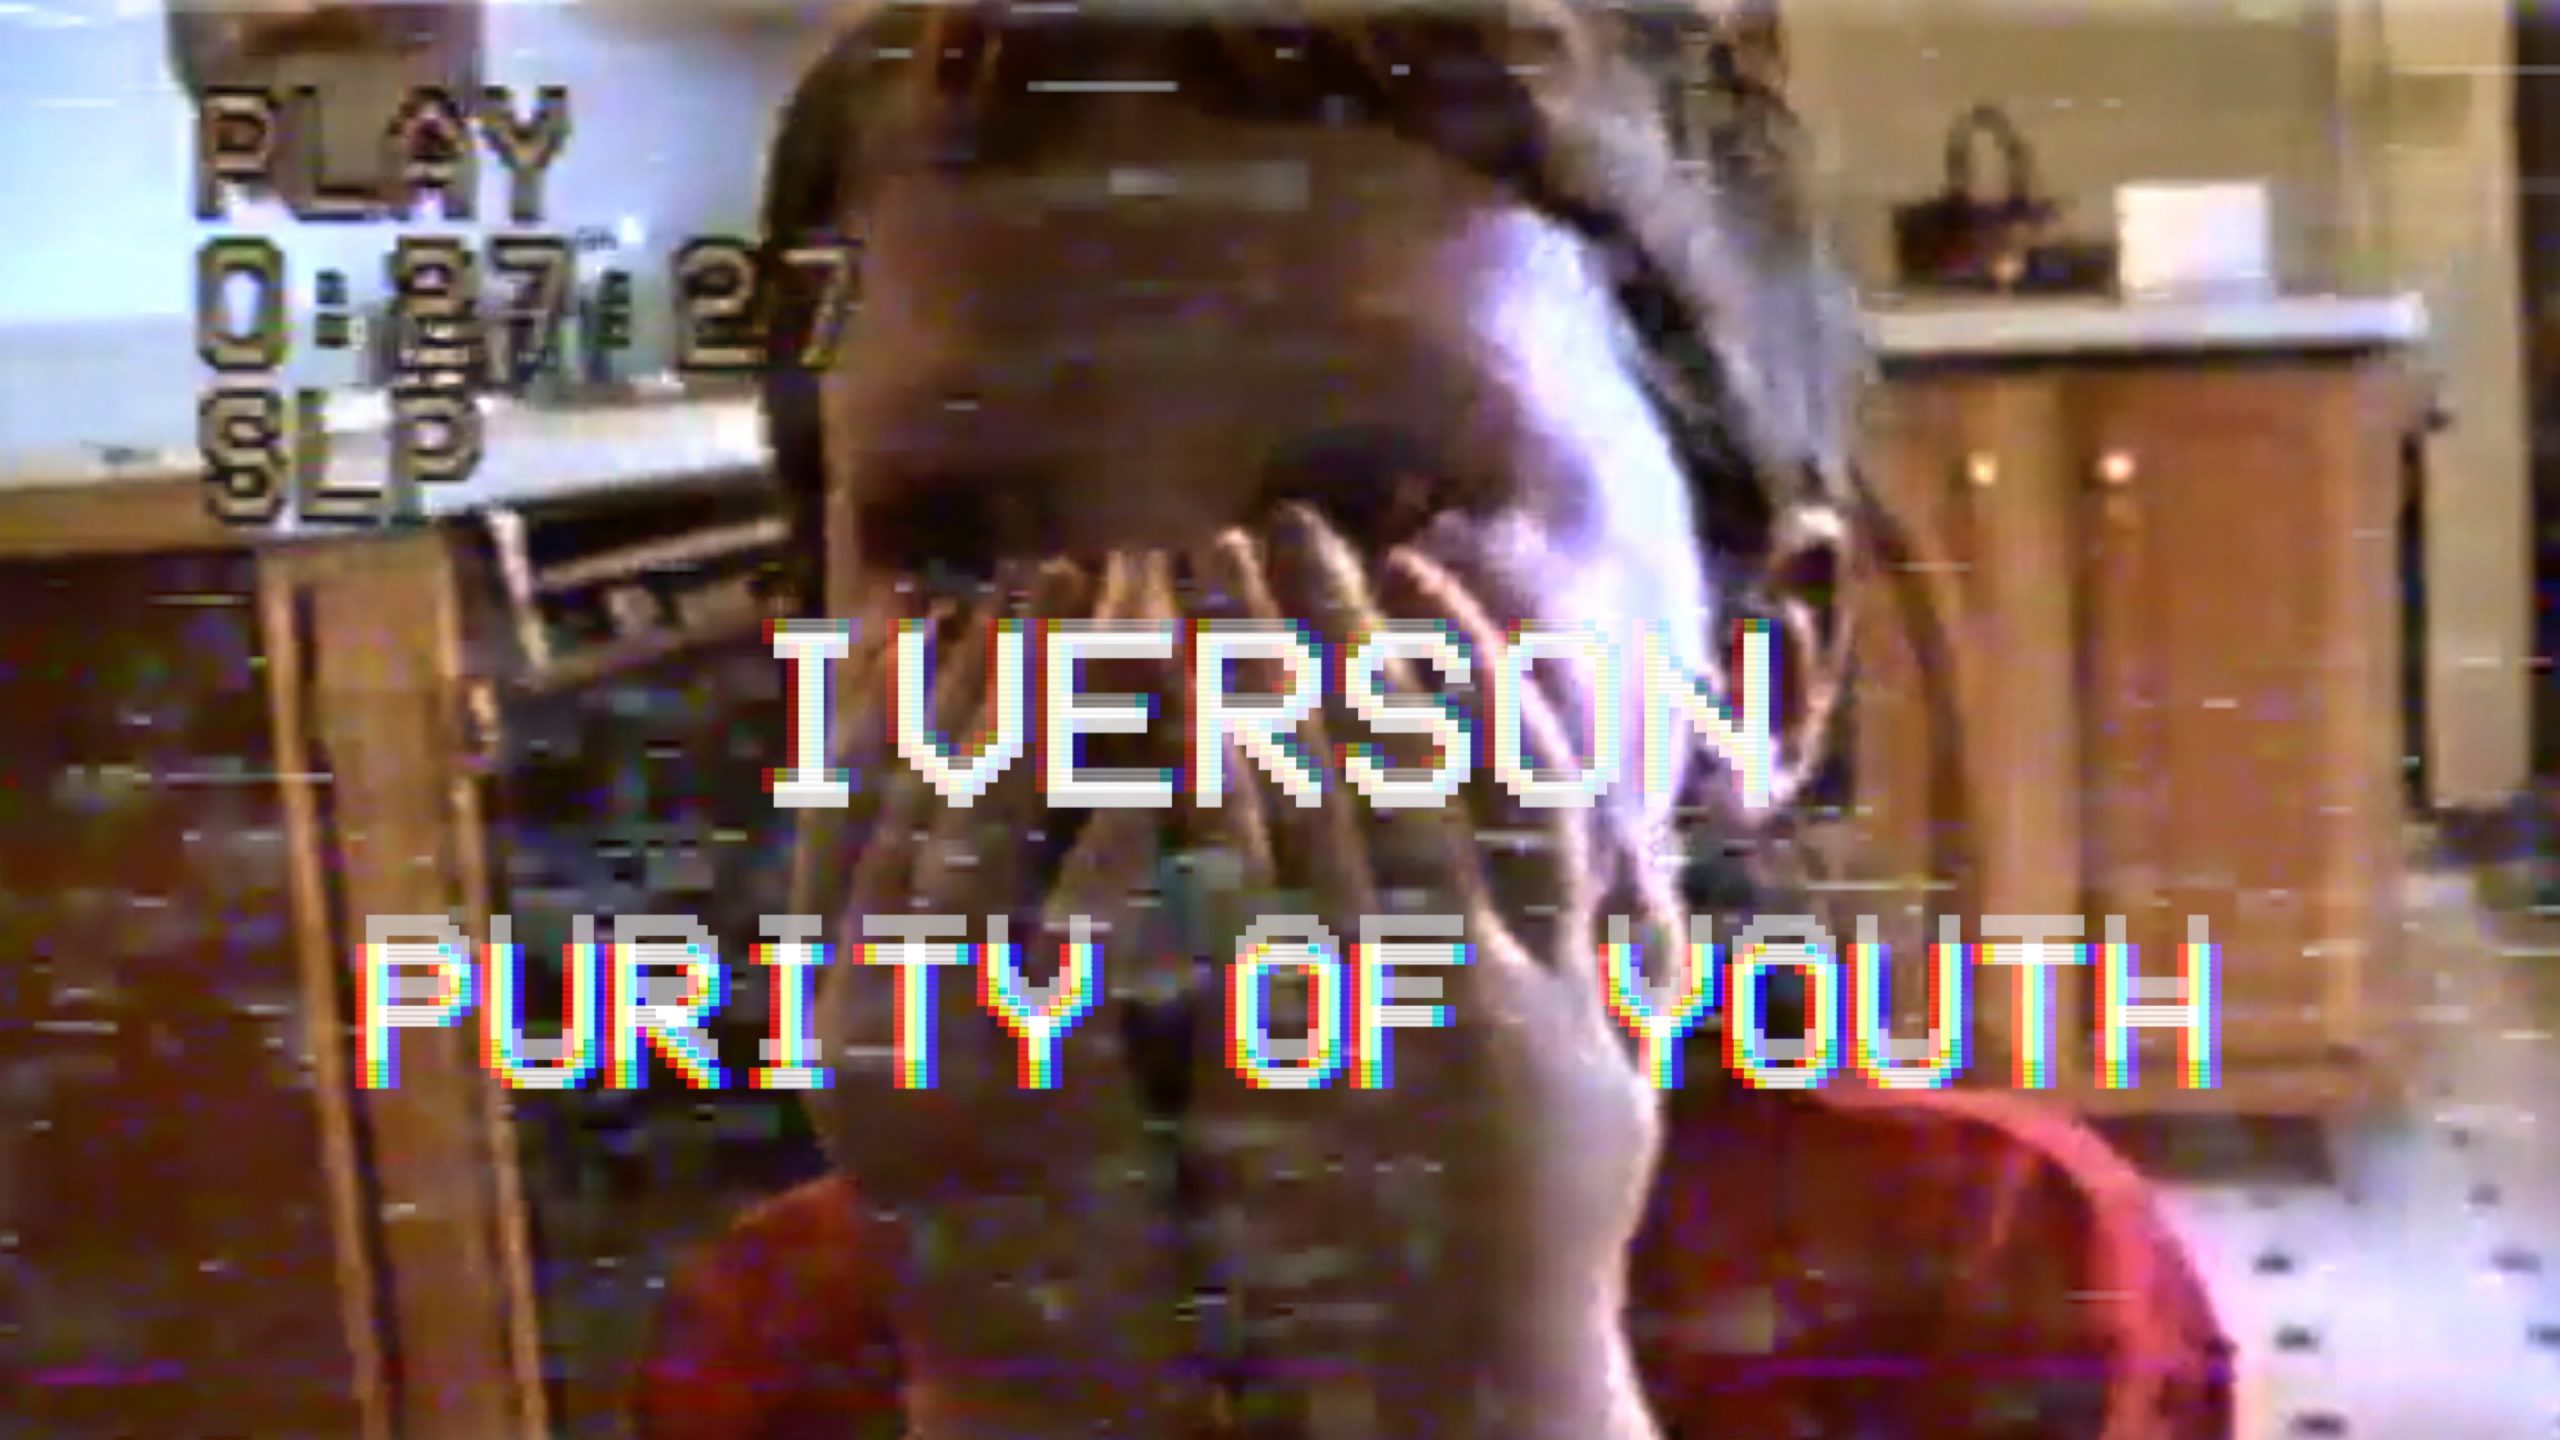 "Purity of Youth" still 1 - IVERSON